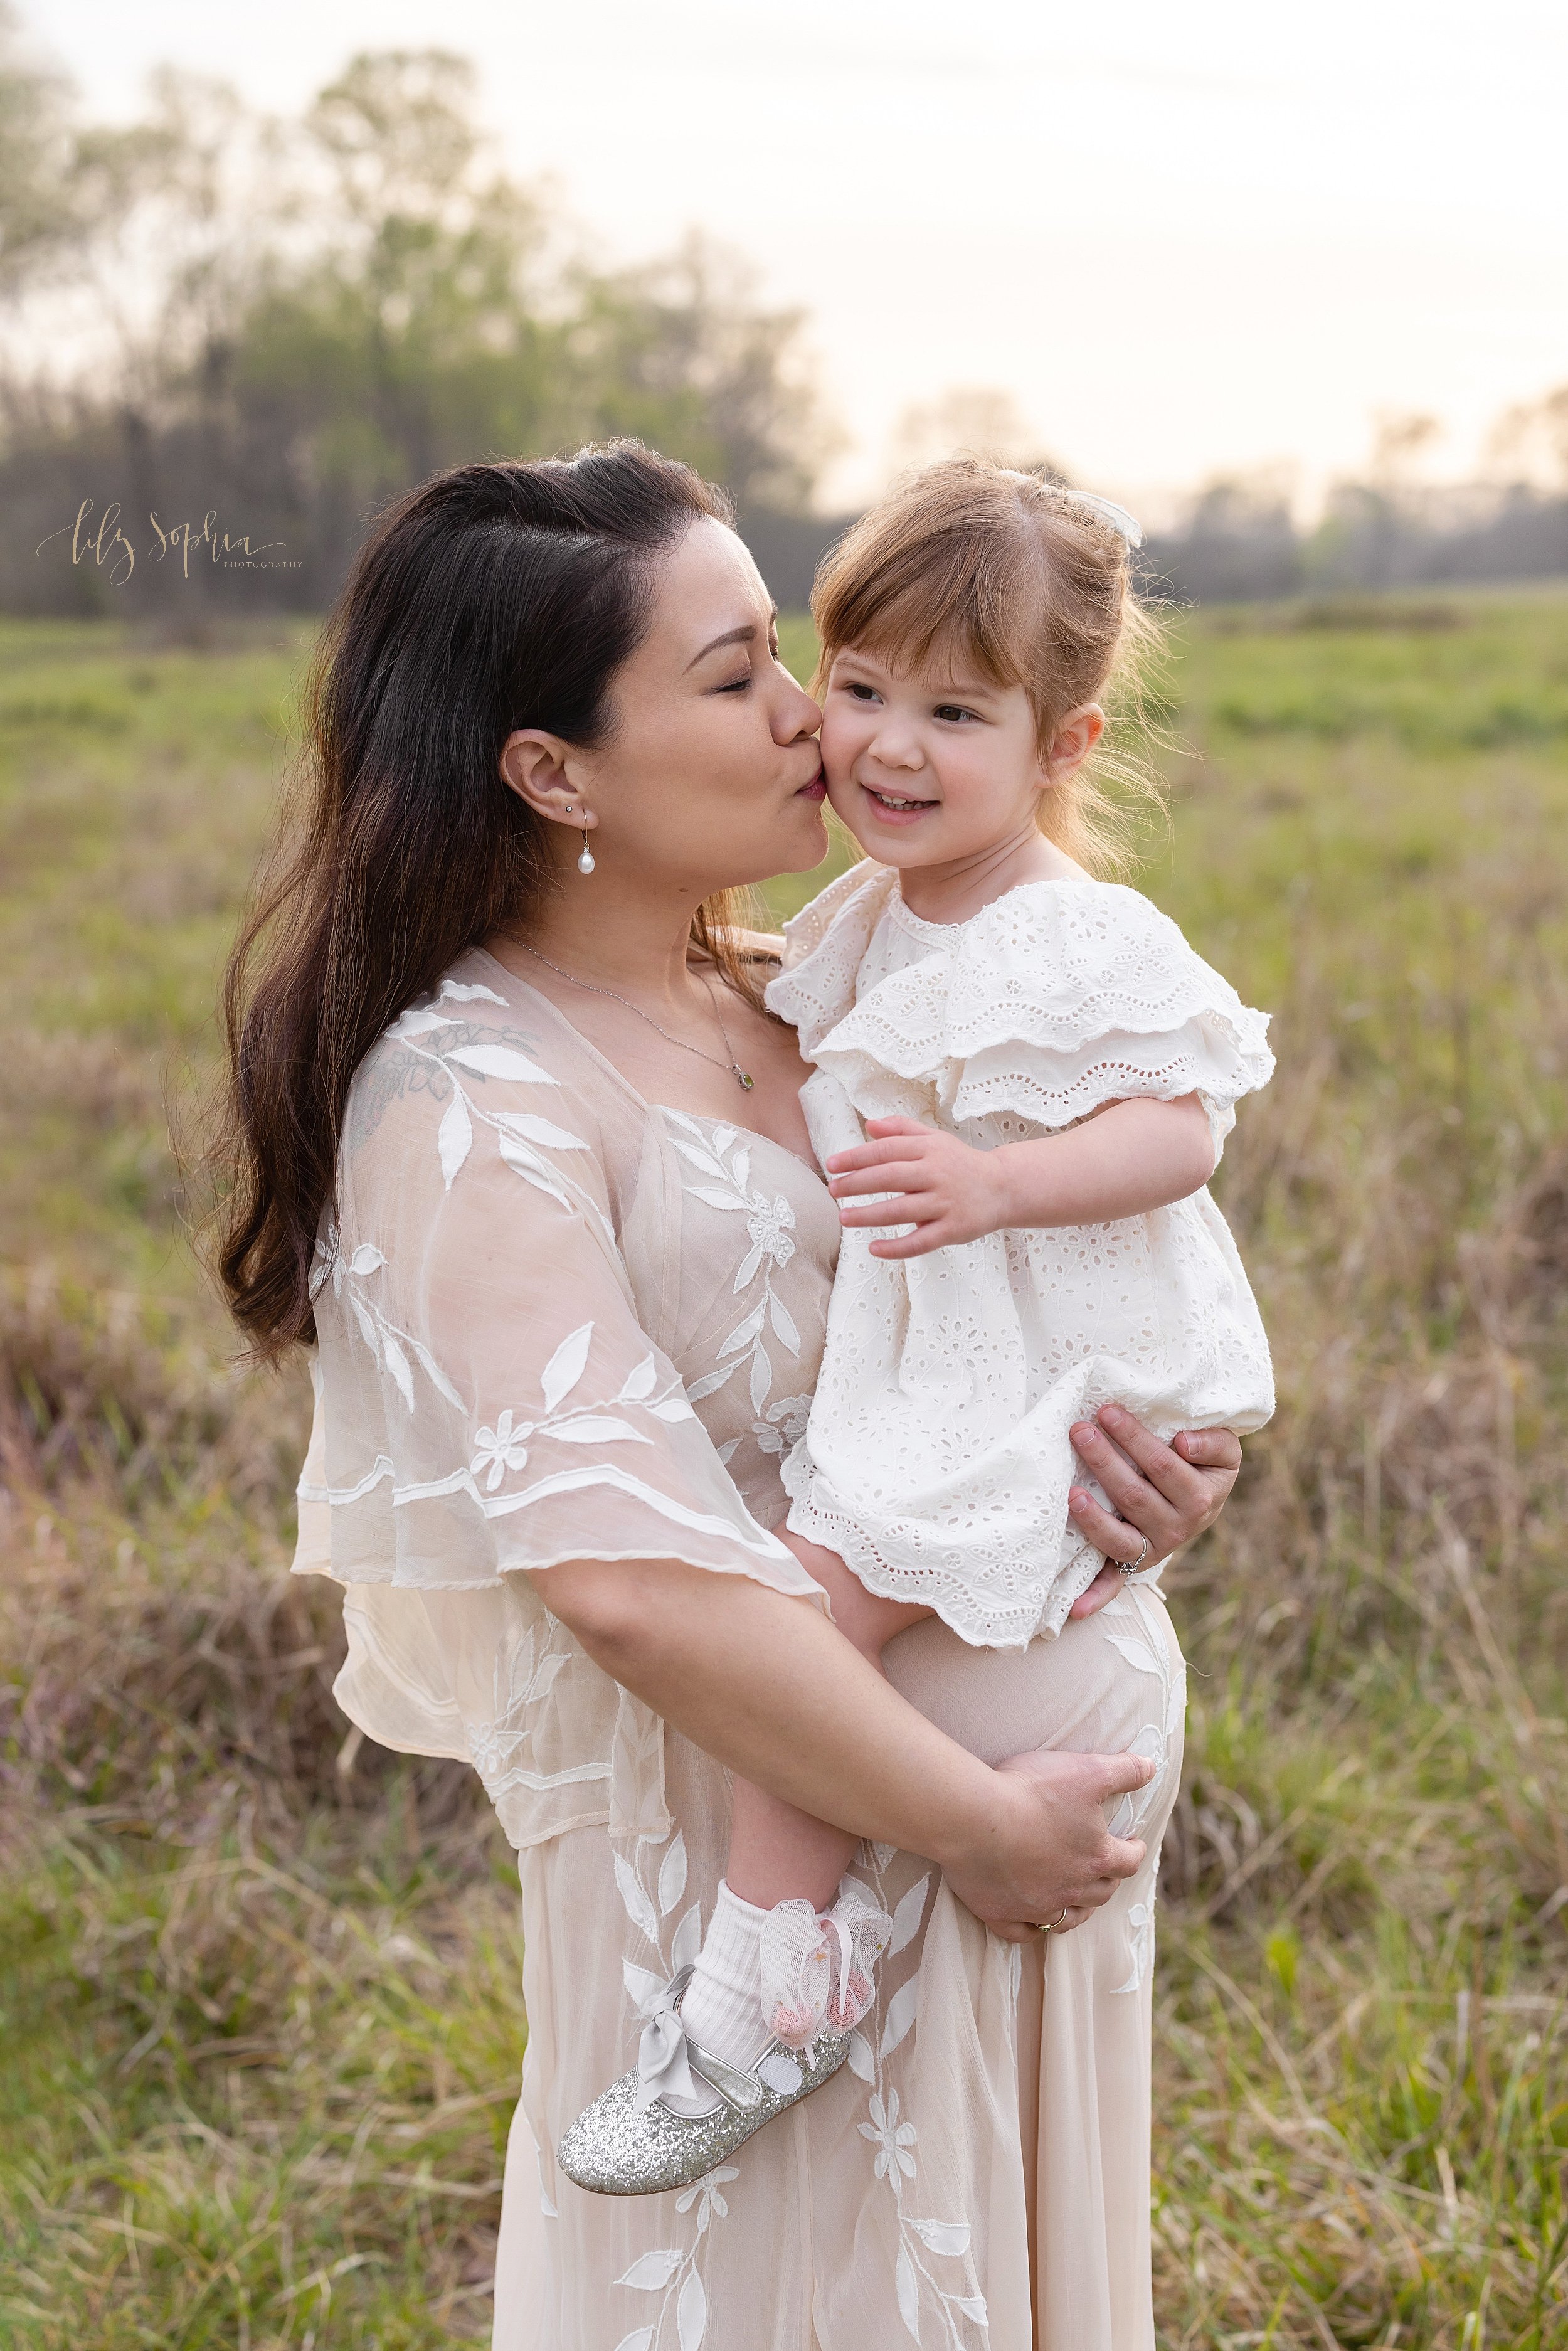  Maternity mother-daughter portrait as the expectant mother holds her young daughter in her arms resting on her belly as she kisses her daughter on her cheek as she stands in an Atlanta field at sunset. 